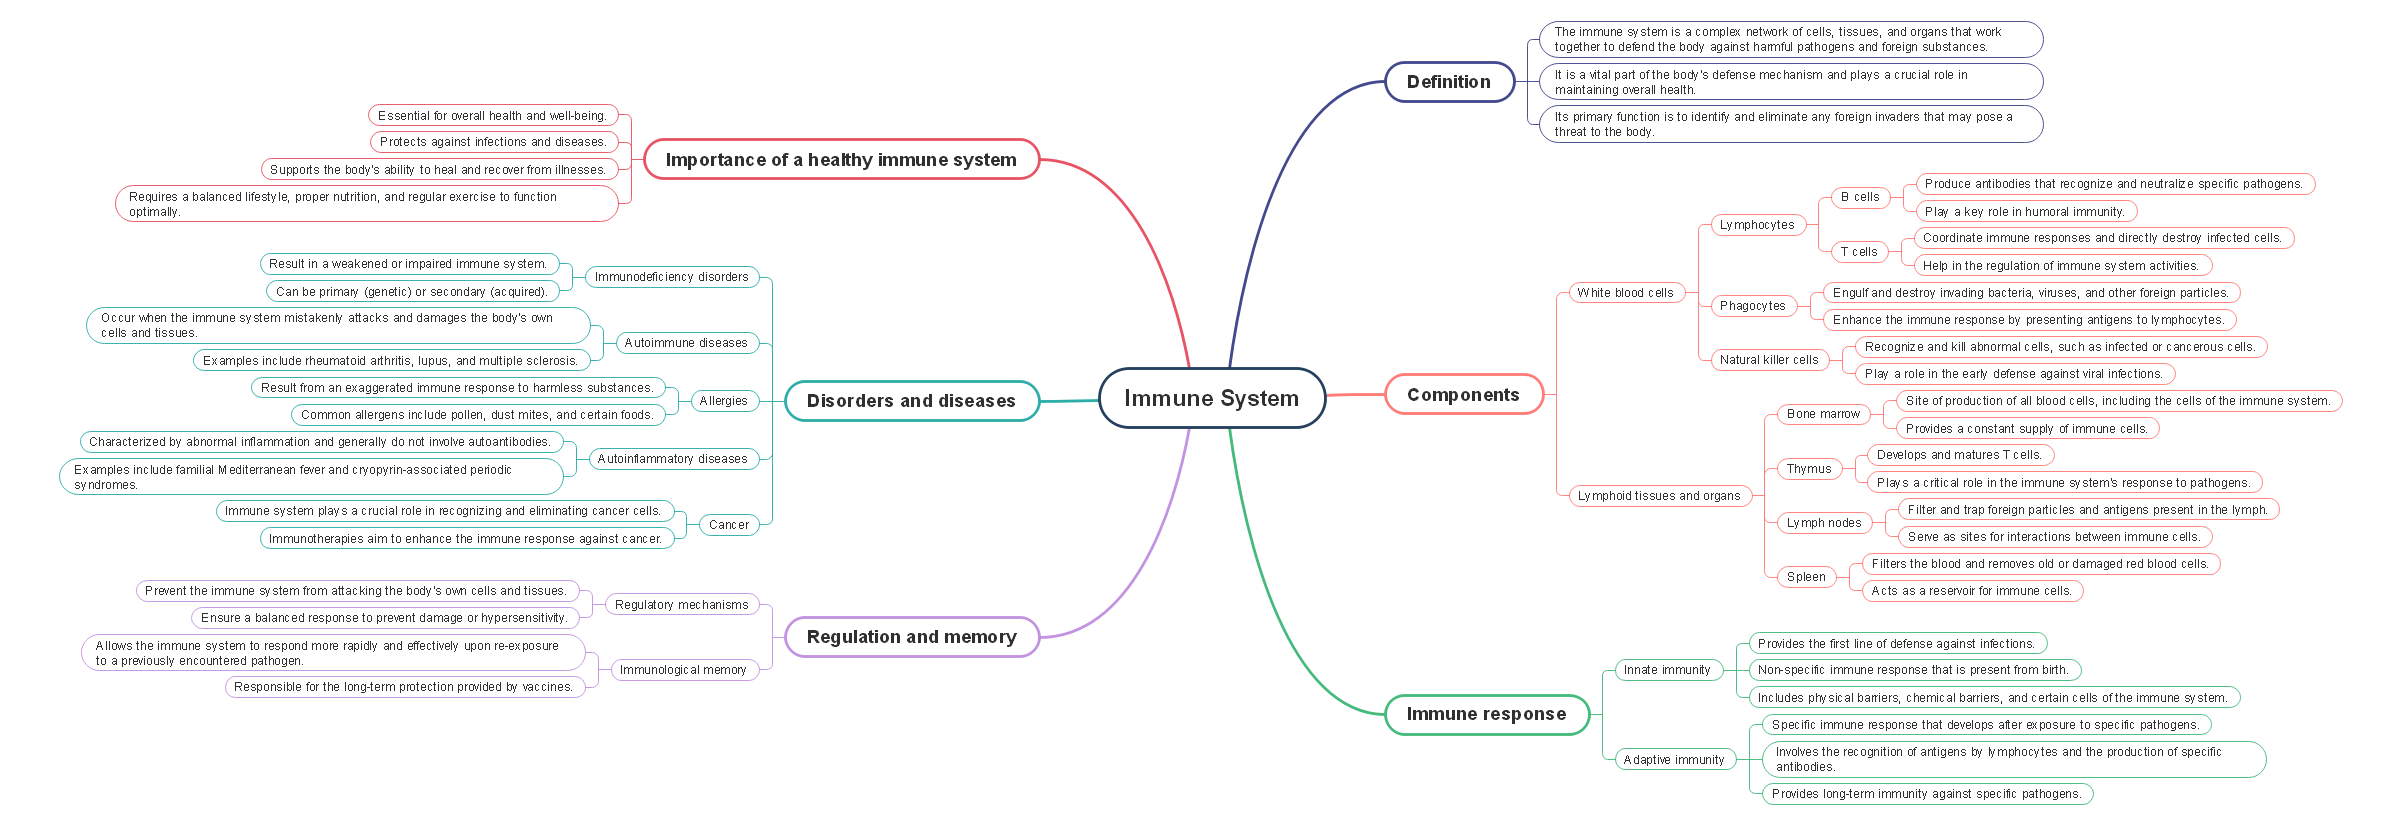 Classic Template for Concept Map of the Immune System